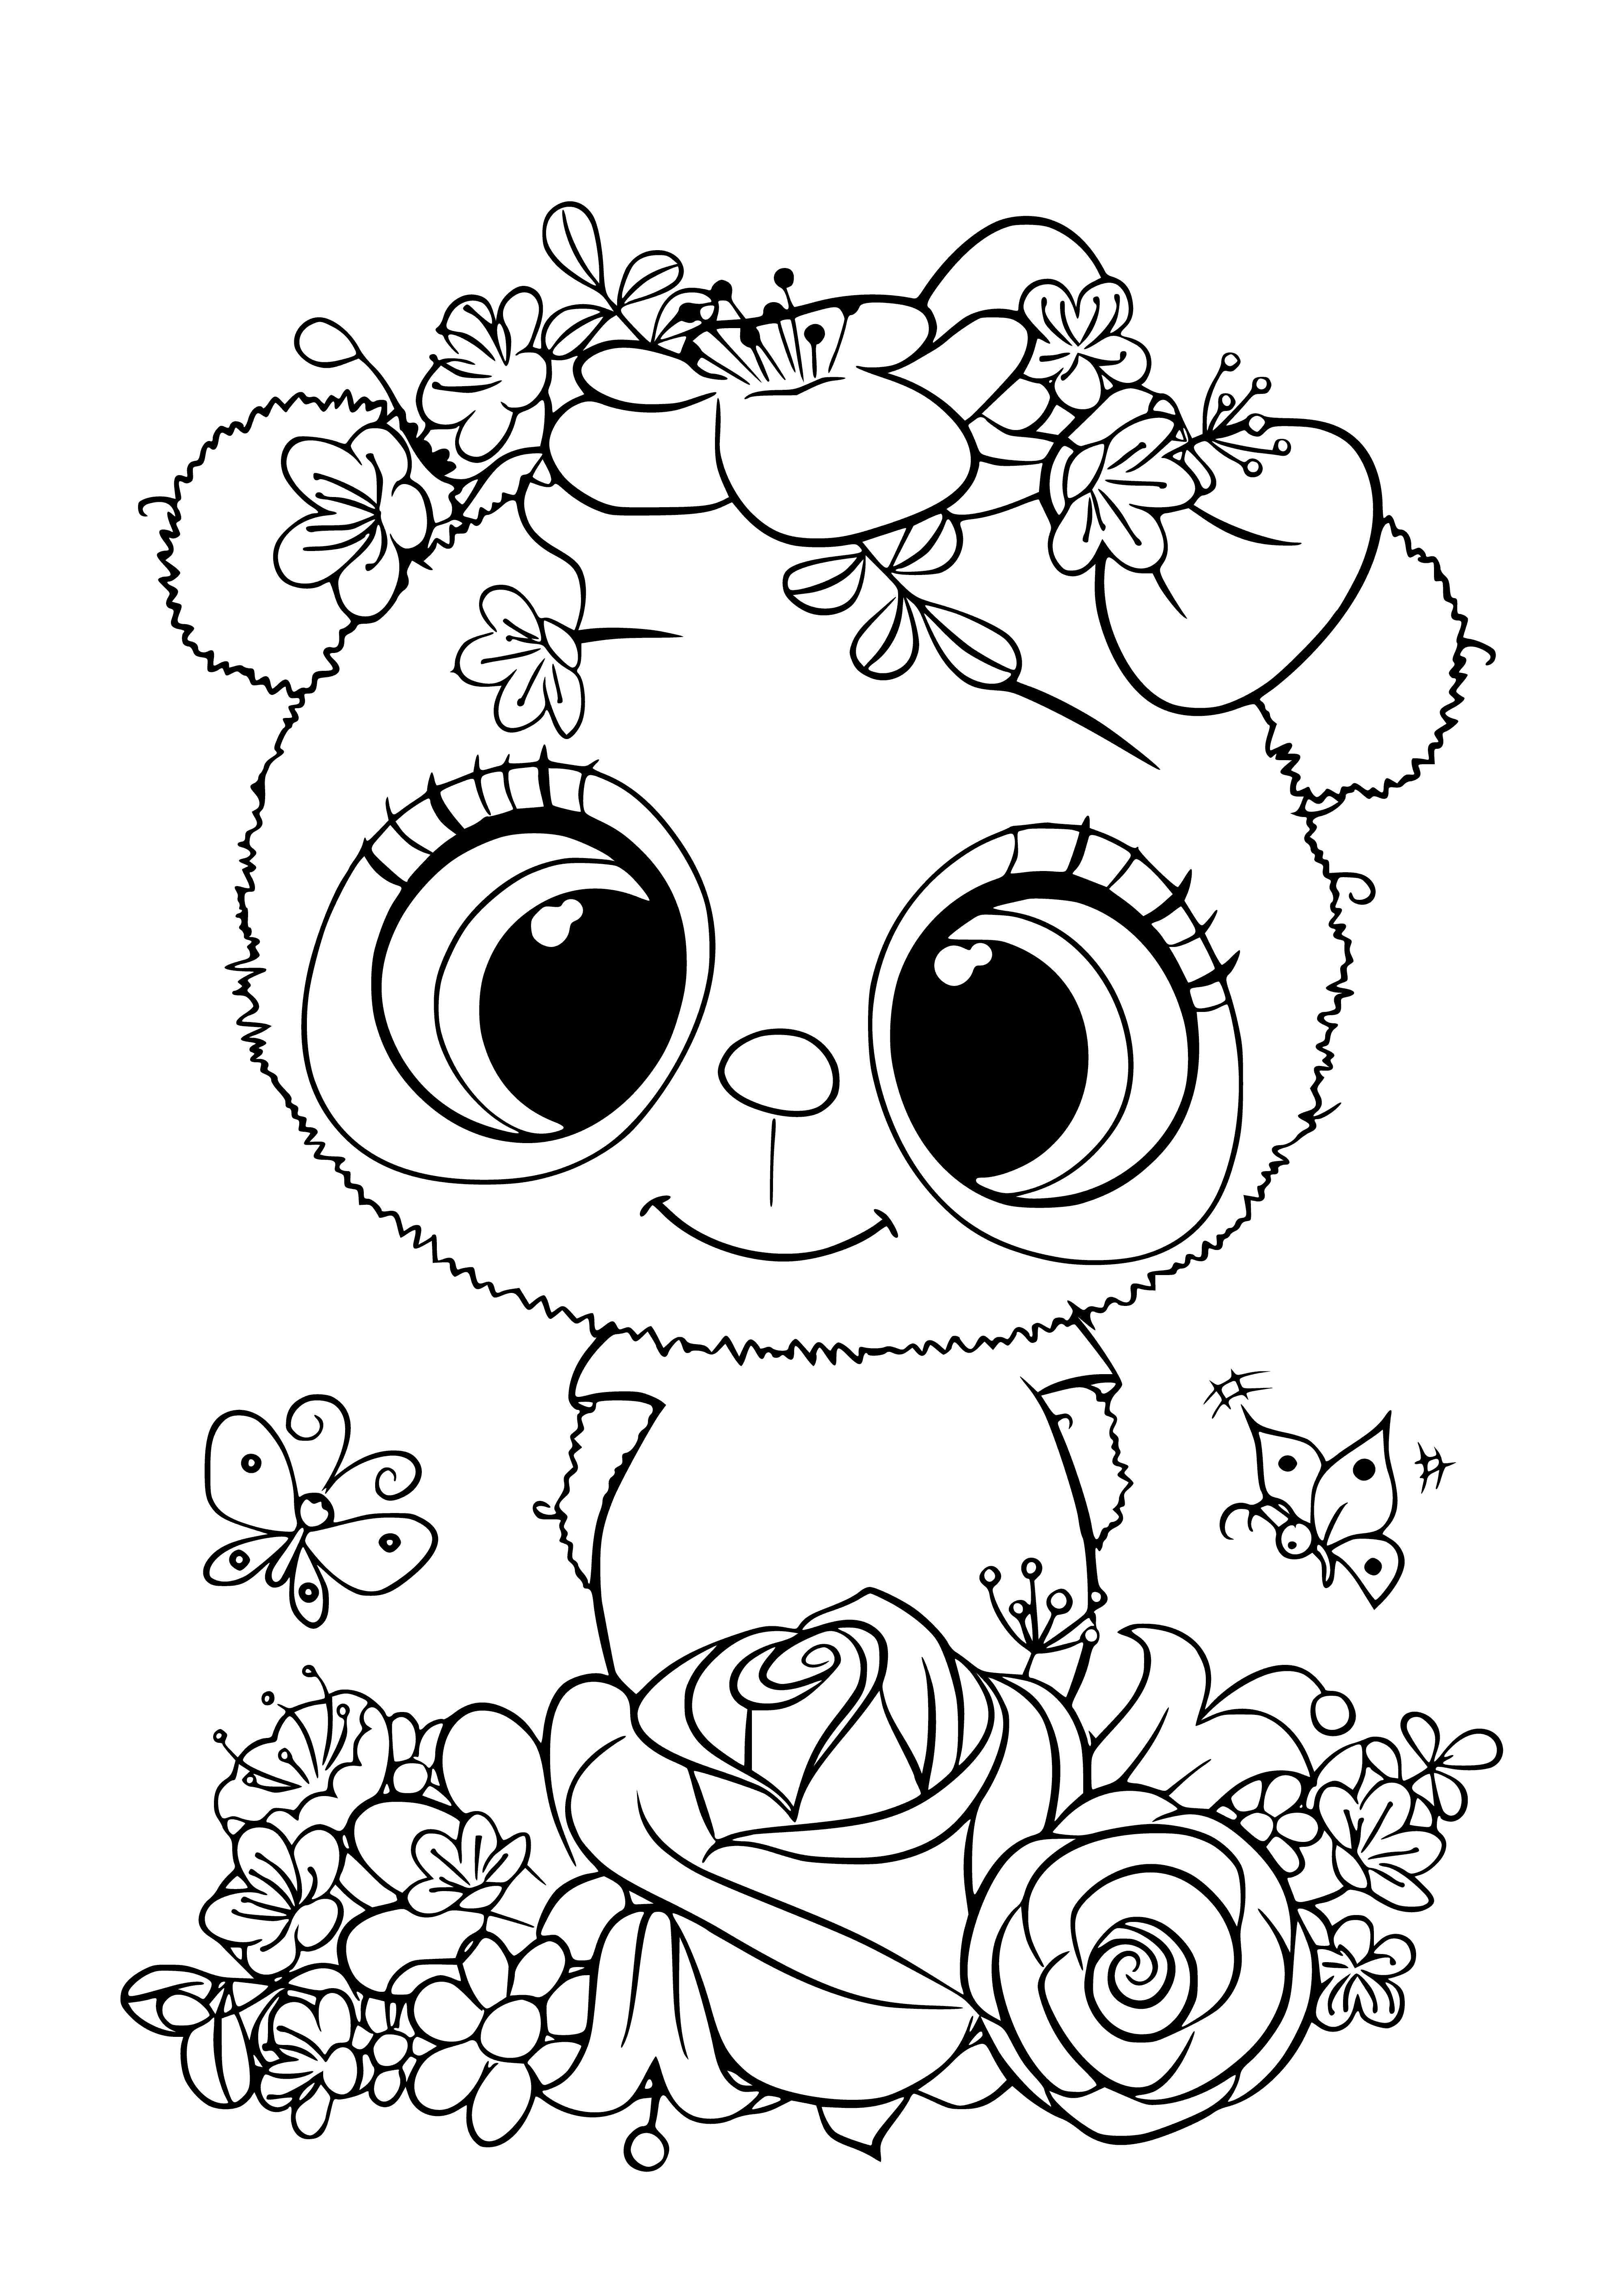 coloring page: Girl on cloud w/ big head & small body, sparkly eyes, pink dress, magic wand w/ heart on end, big smile.